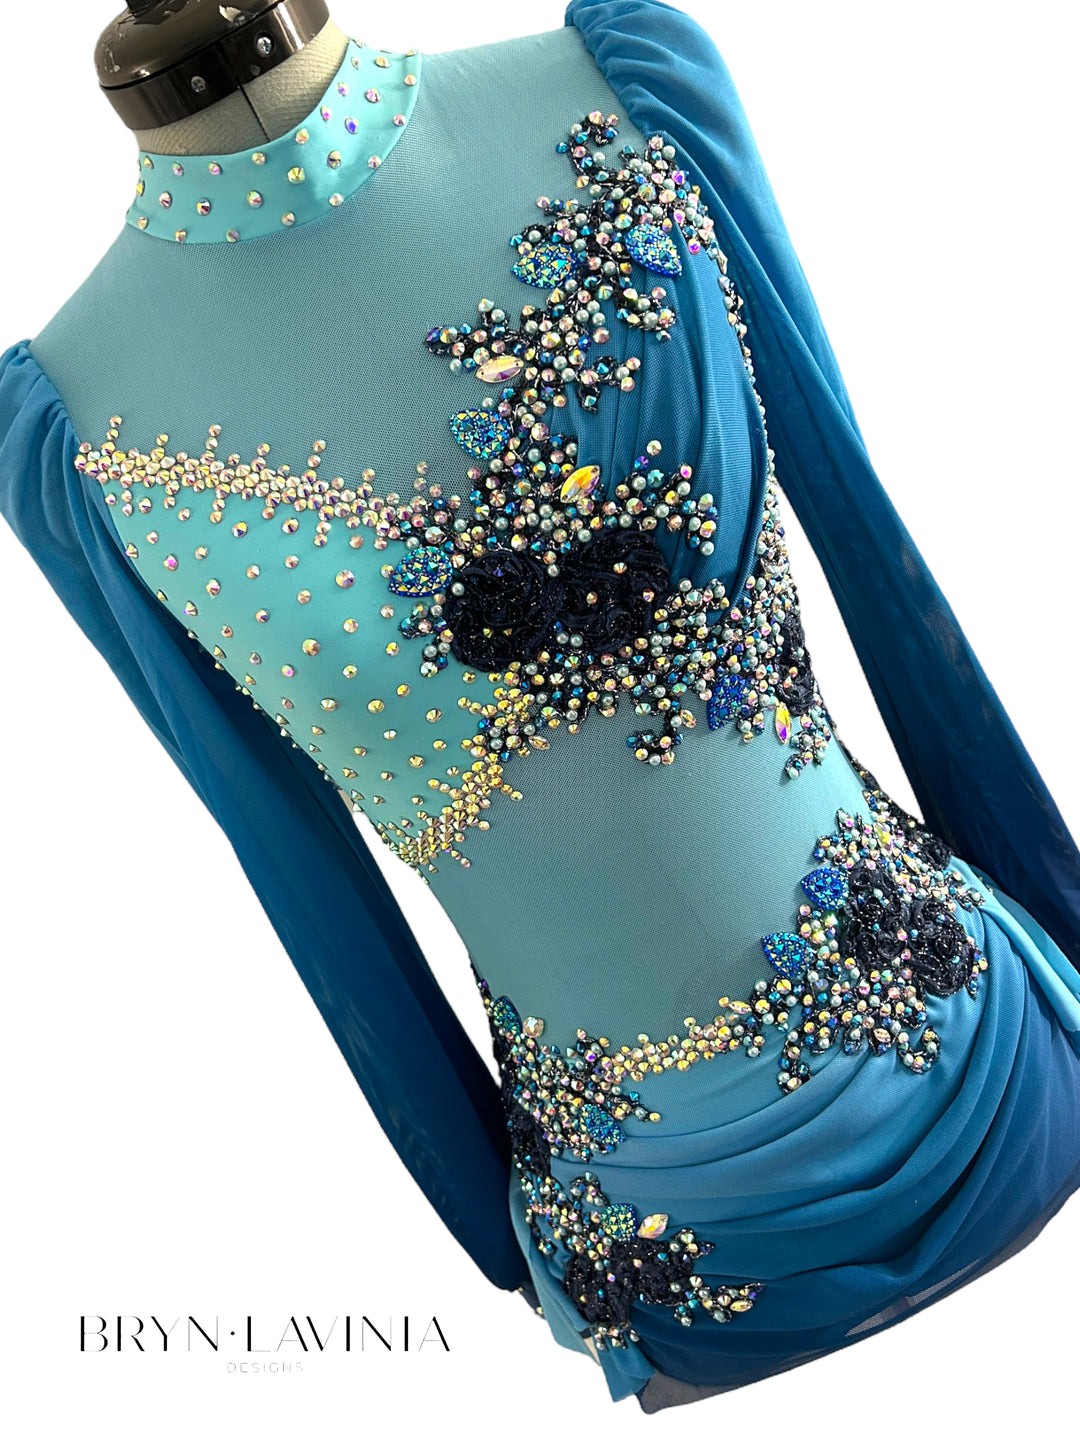 NEW AXS Blue Ombré ready to ship costume